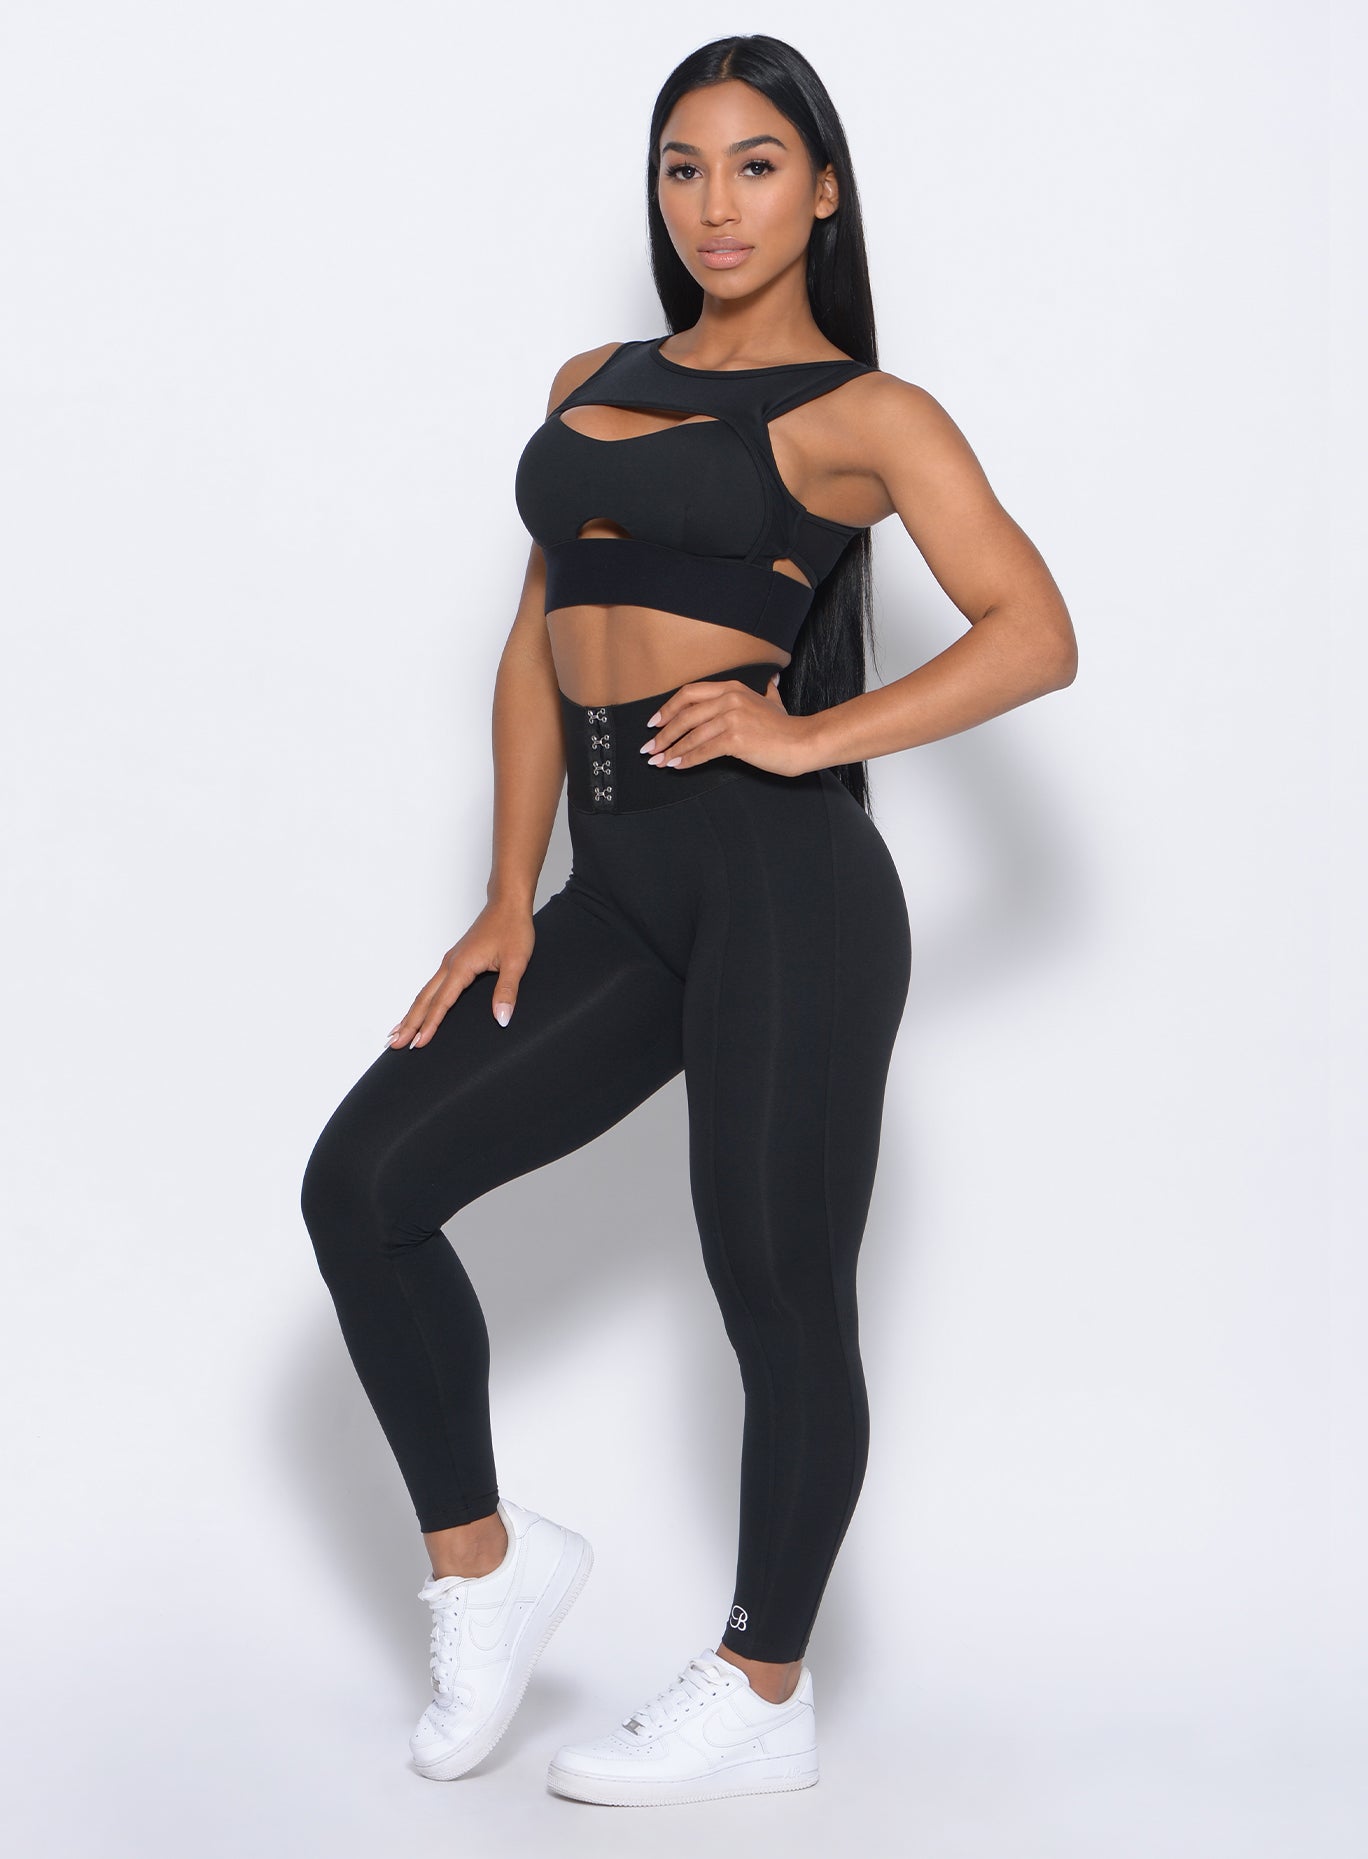 Left side view of the model angled left in our black waist cincher leggings and a matching bra